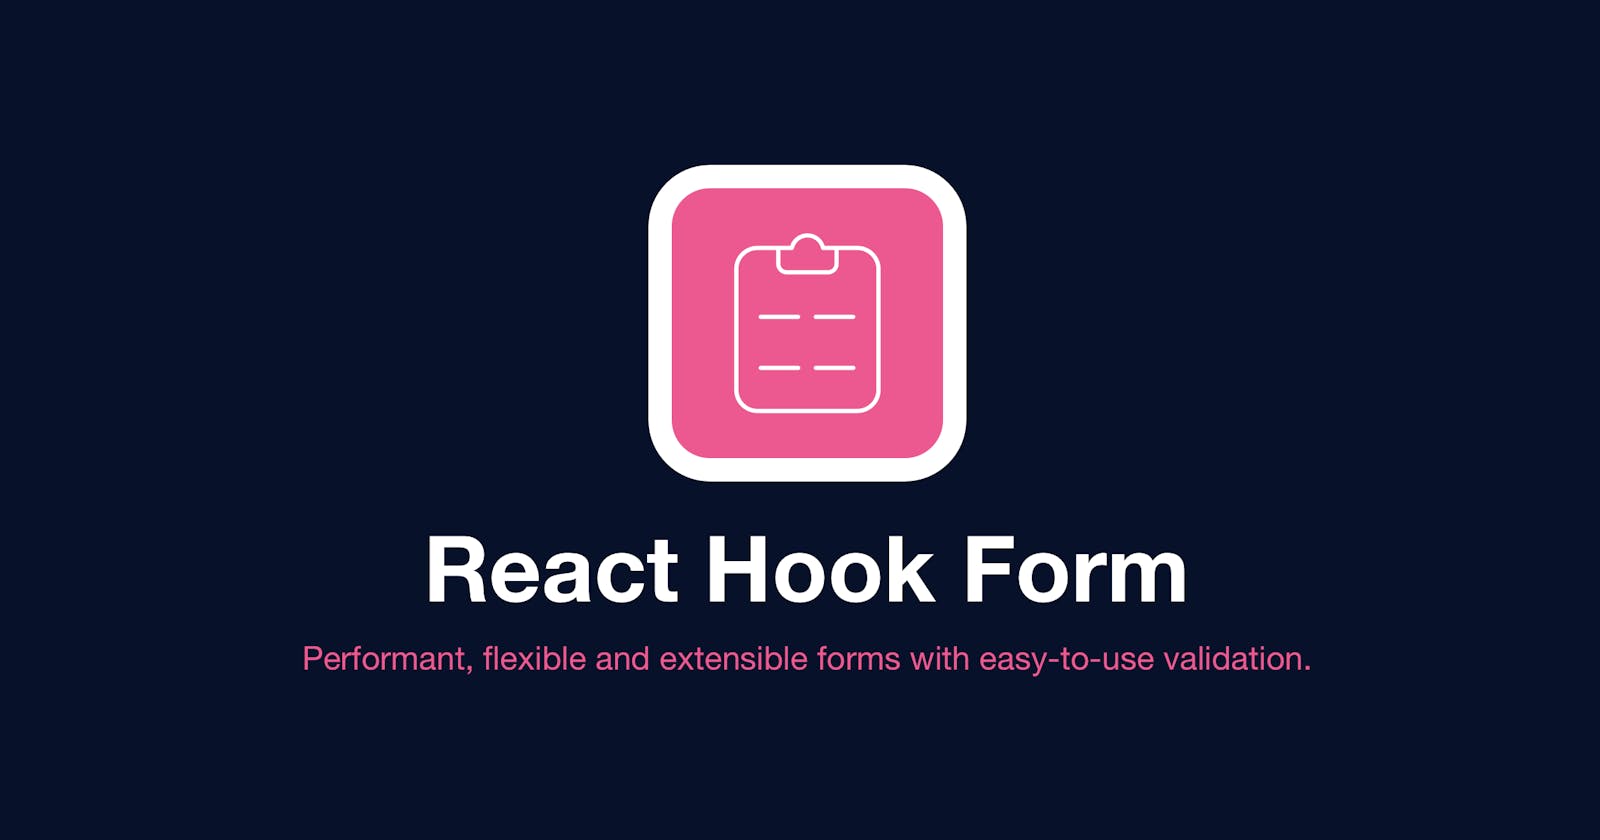 Getting Started with React Hook Form (Part 1)